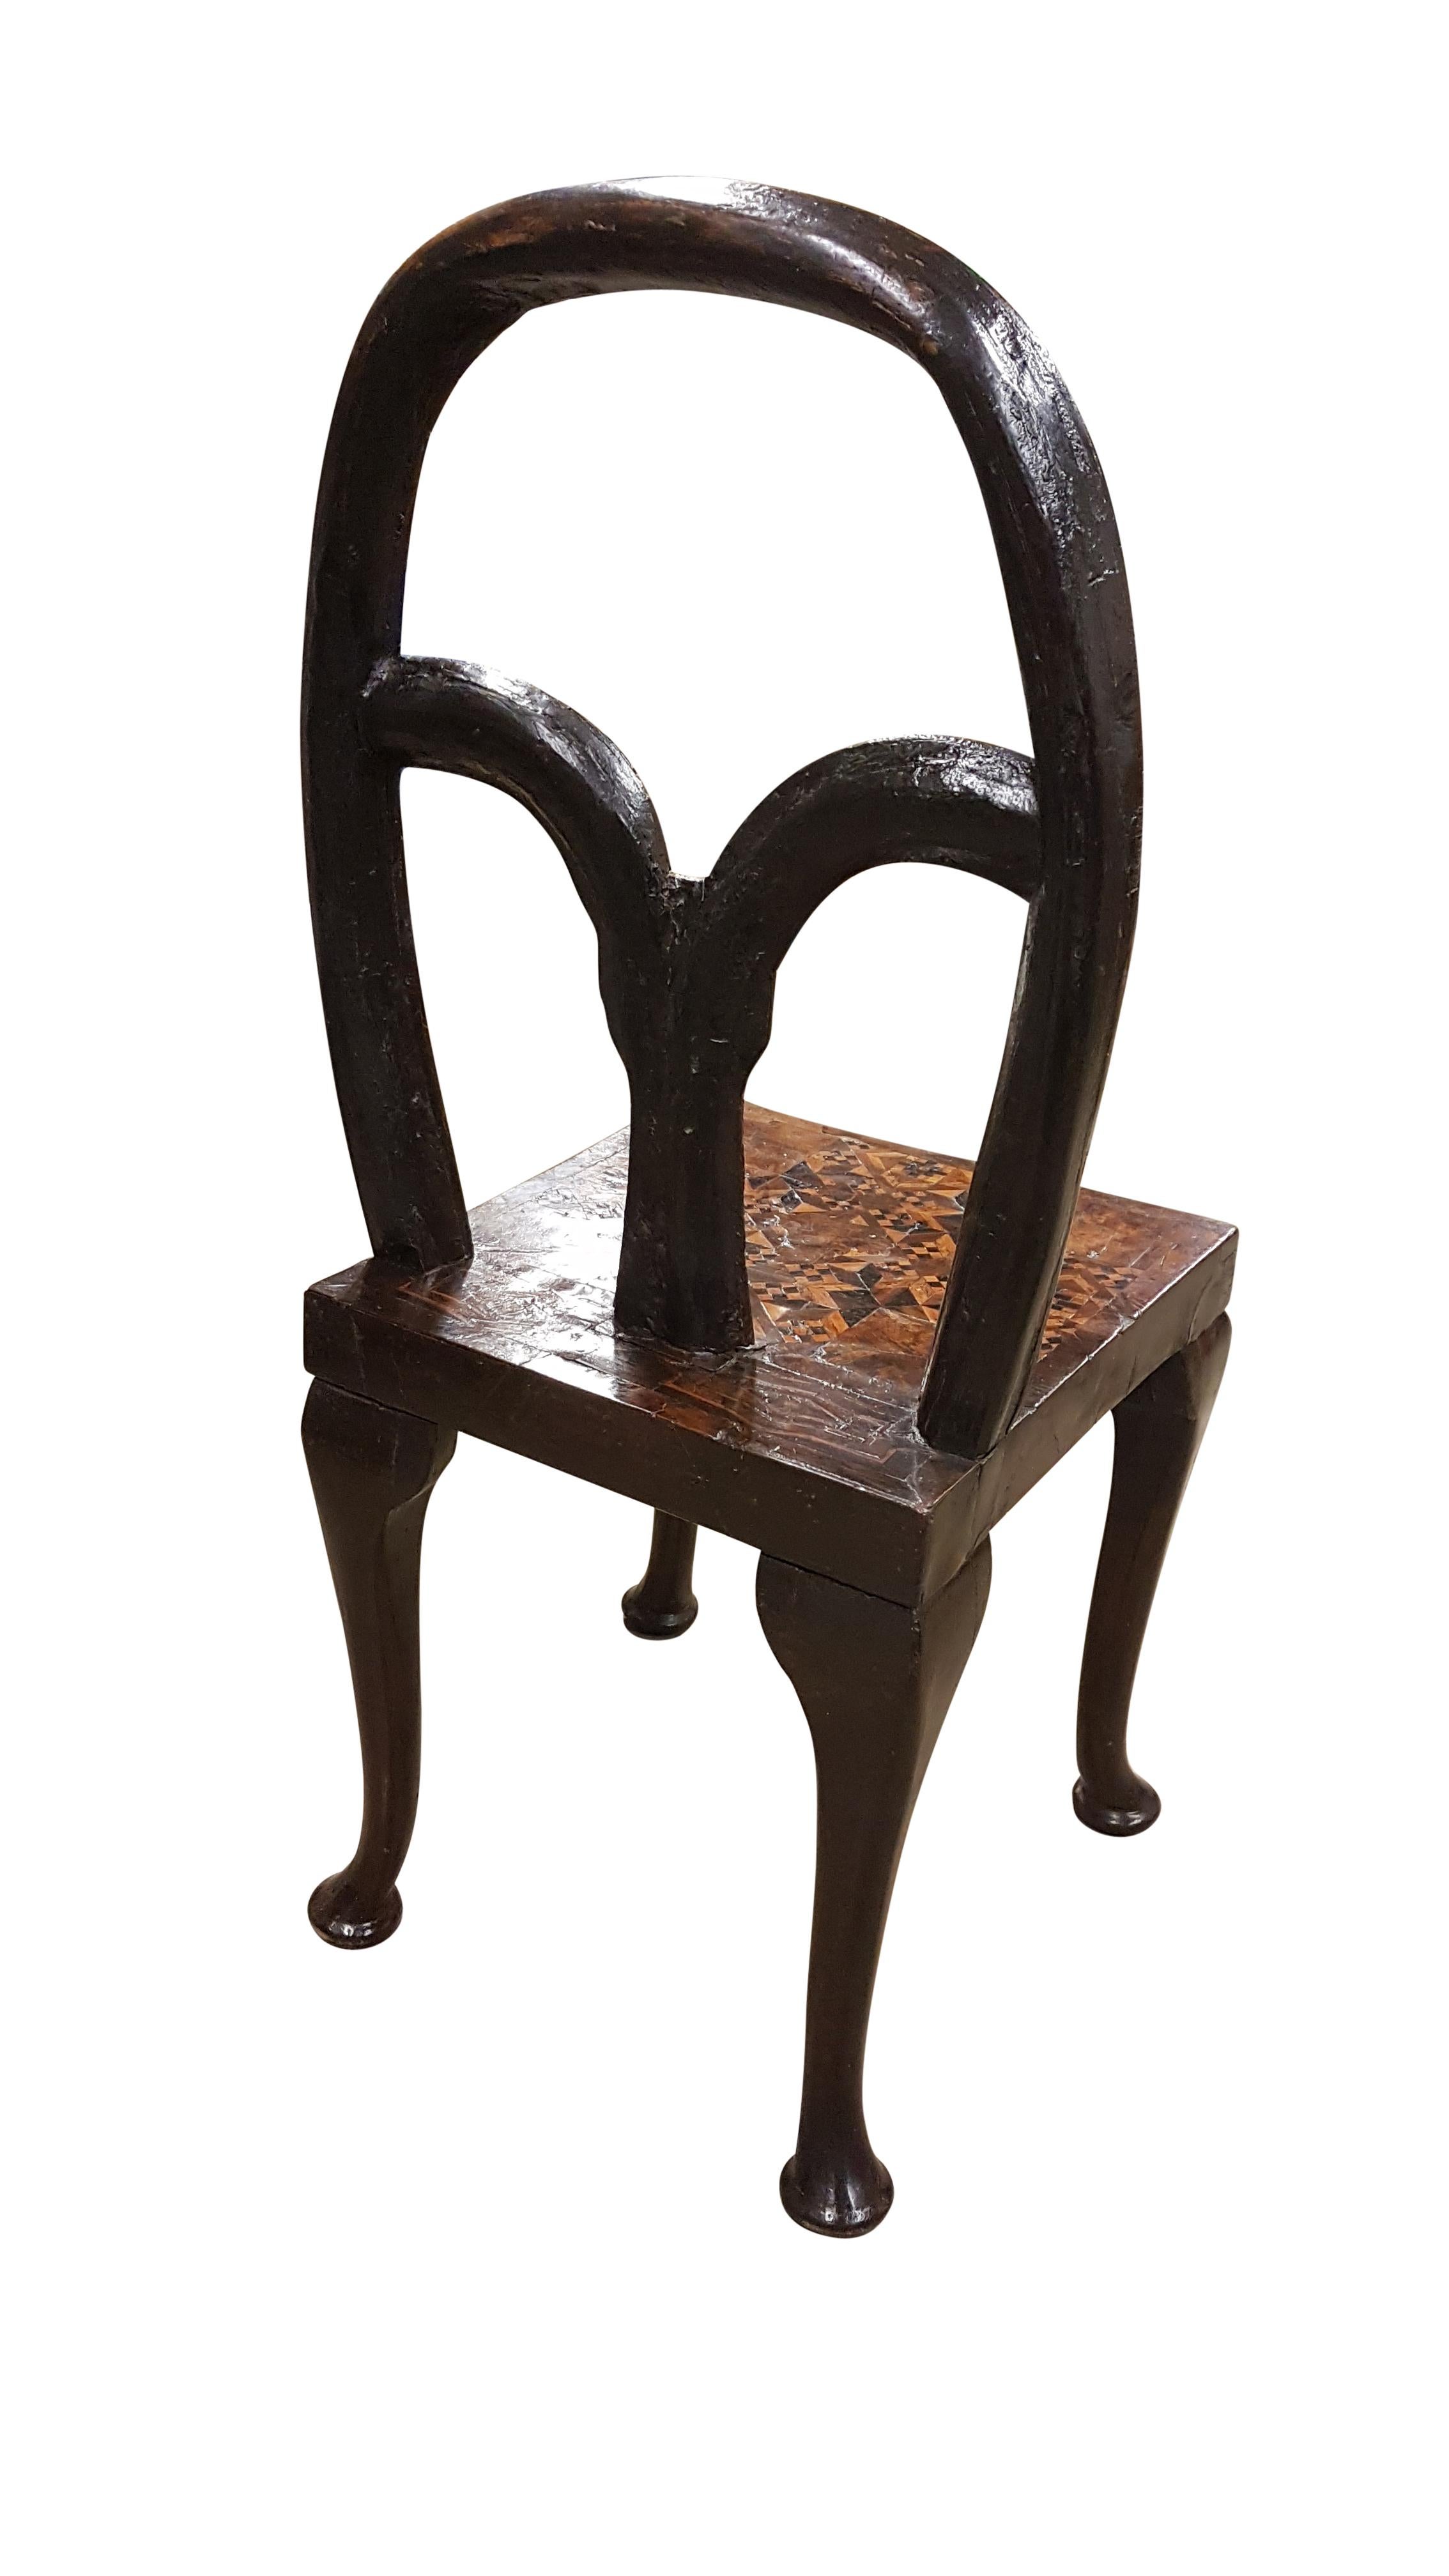 This is an unusual little 18th century and later Spanish walnut chair, the top is veneered and inlaid on the front whilst the back is in branch style. The seat has a beautiful patina to the veneered walnut and inlay, the legs would originally have